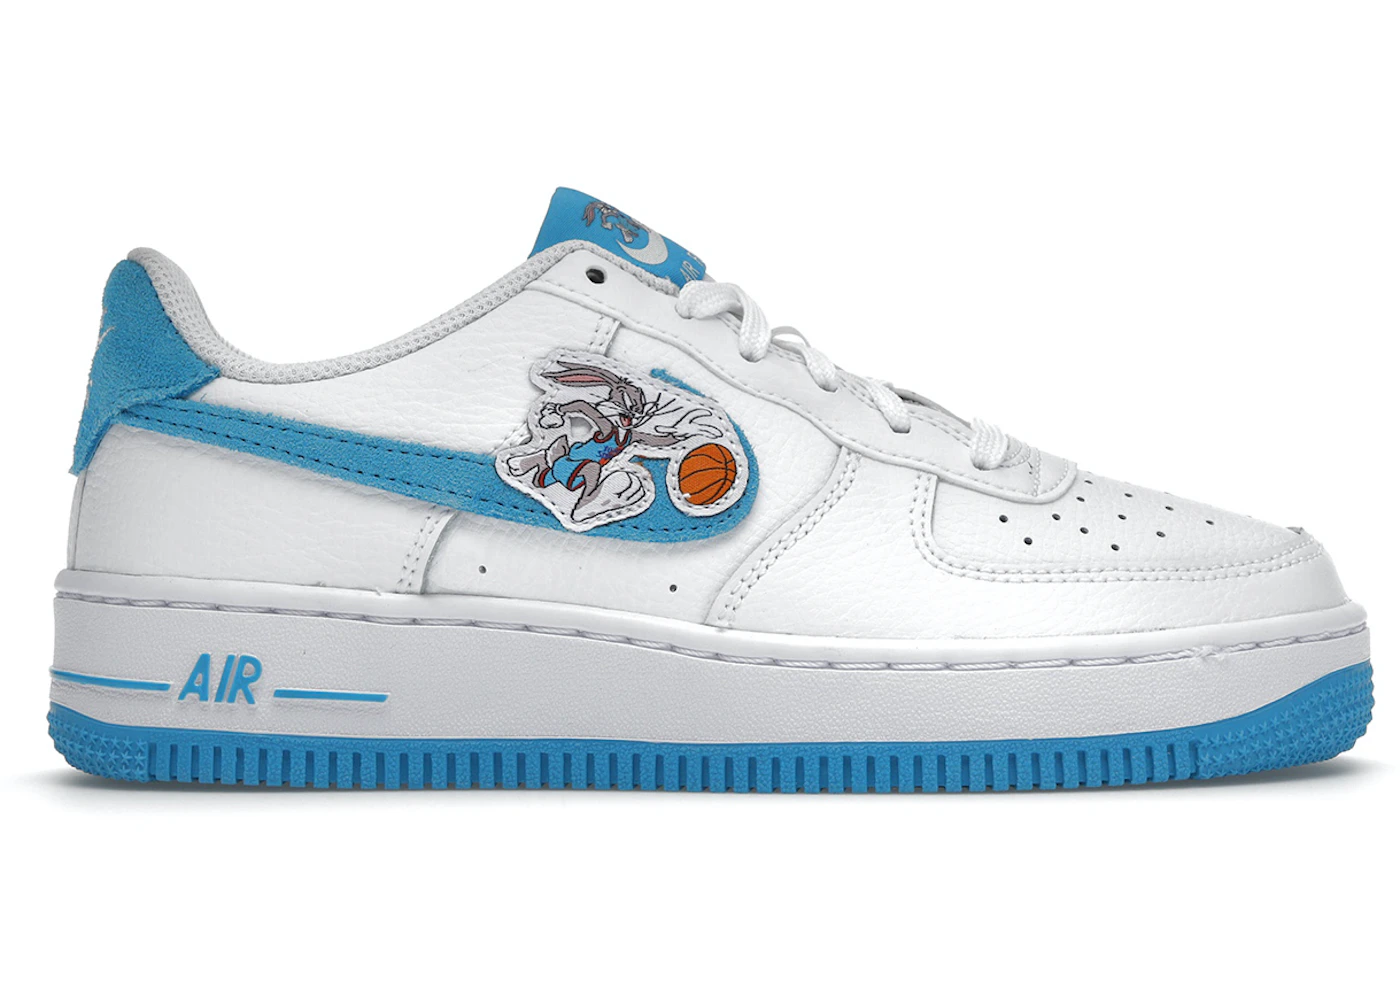 Nike lola bunny air force 1 Air Force 1 Low Hare Space Jam (GS) - DM3353-100 - US